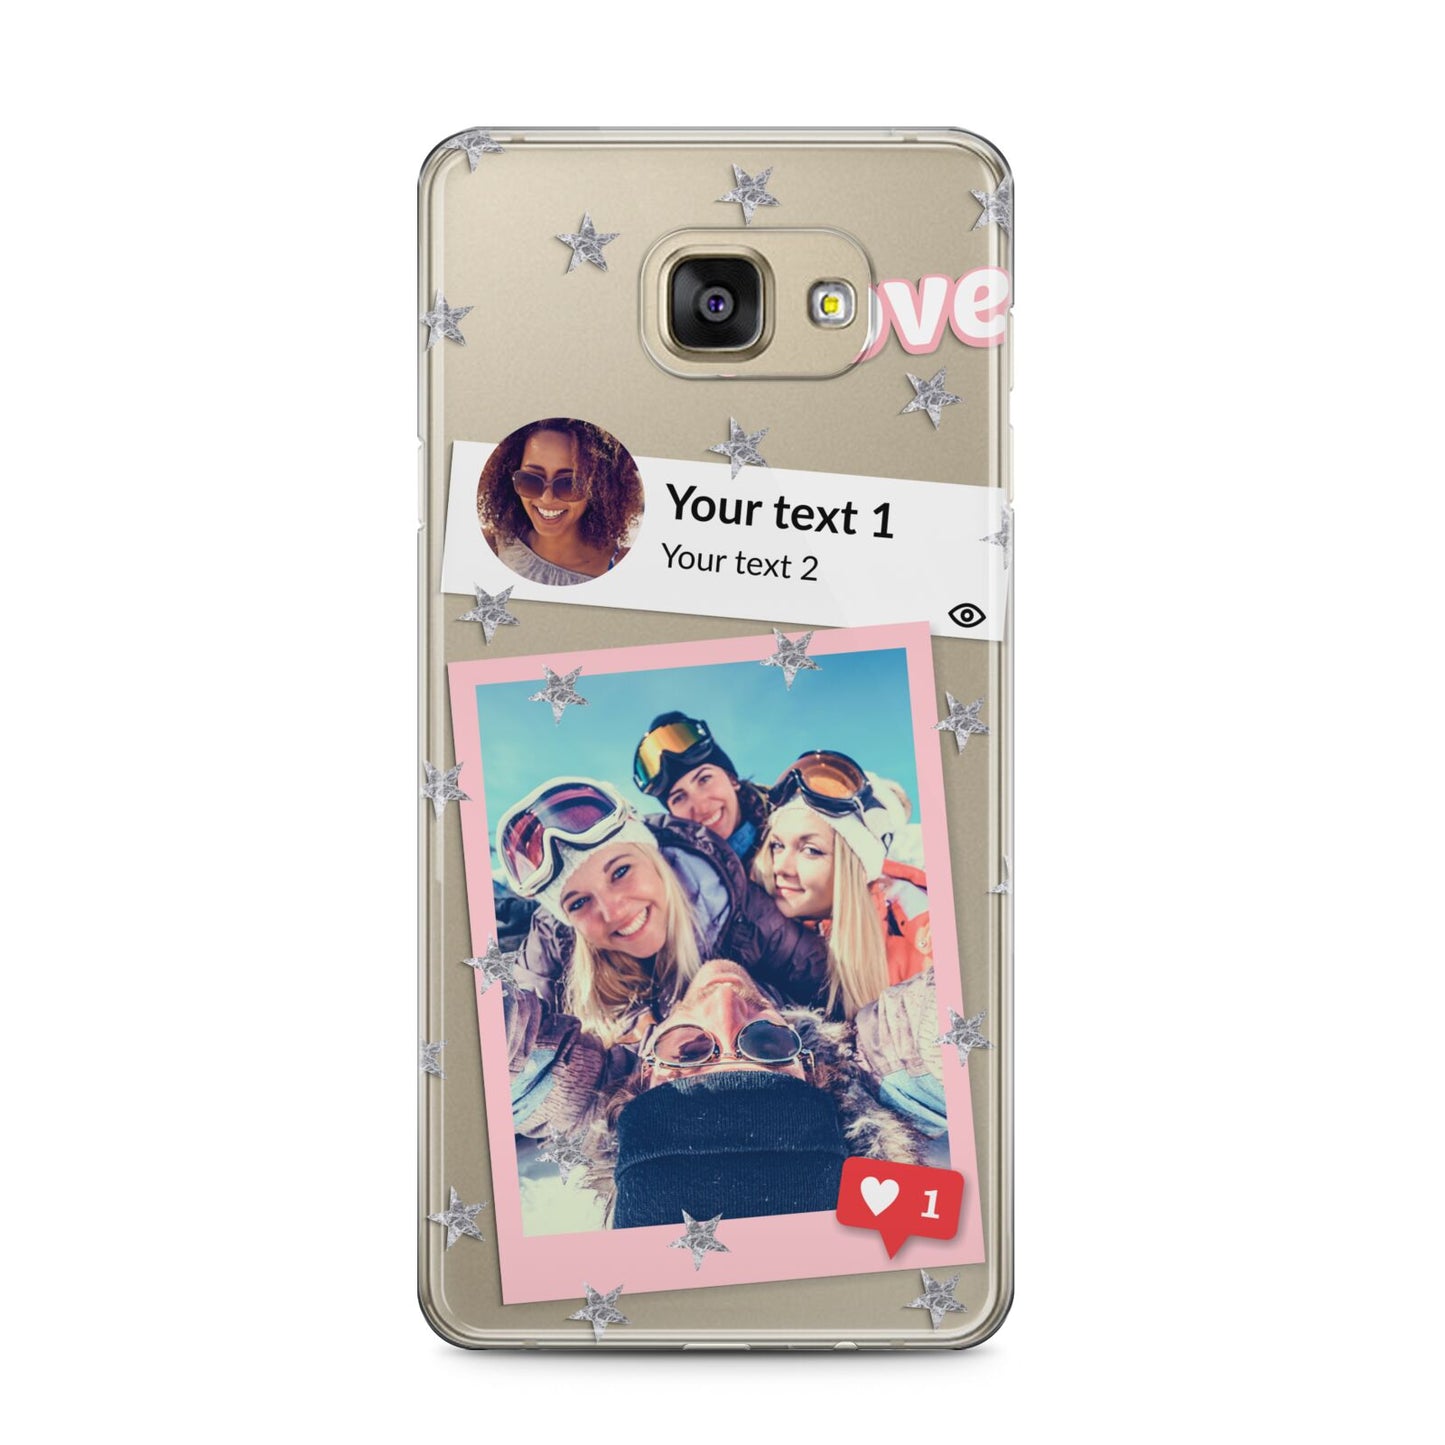 Starry Social Media Photo Montage Upload with Text Samsung Galaxy A5 2016 Case on gold phone